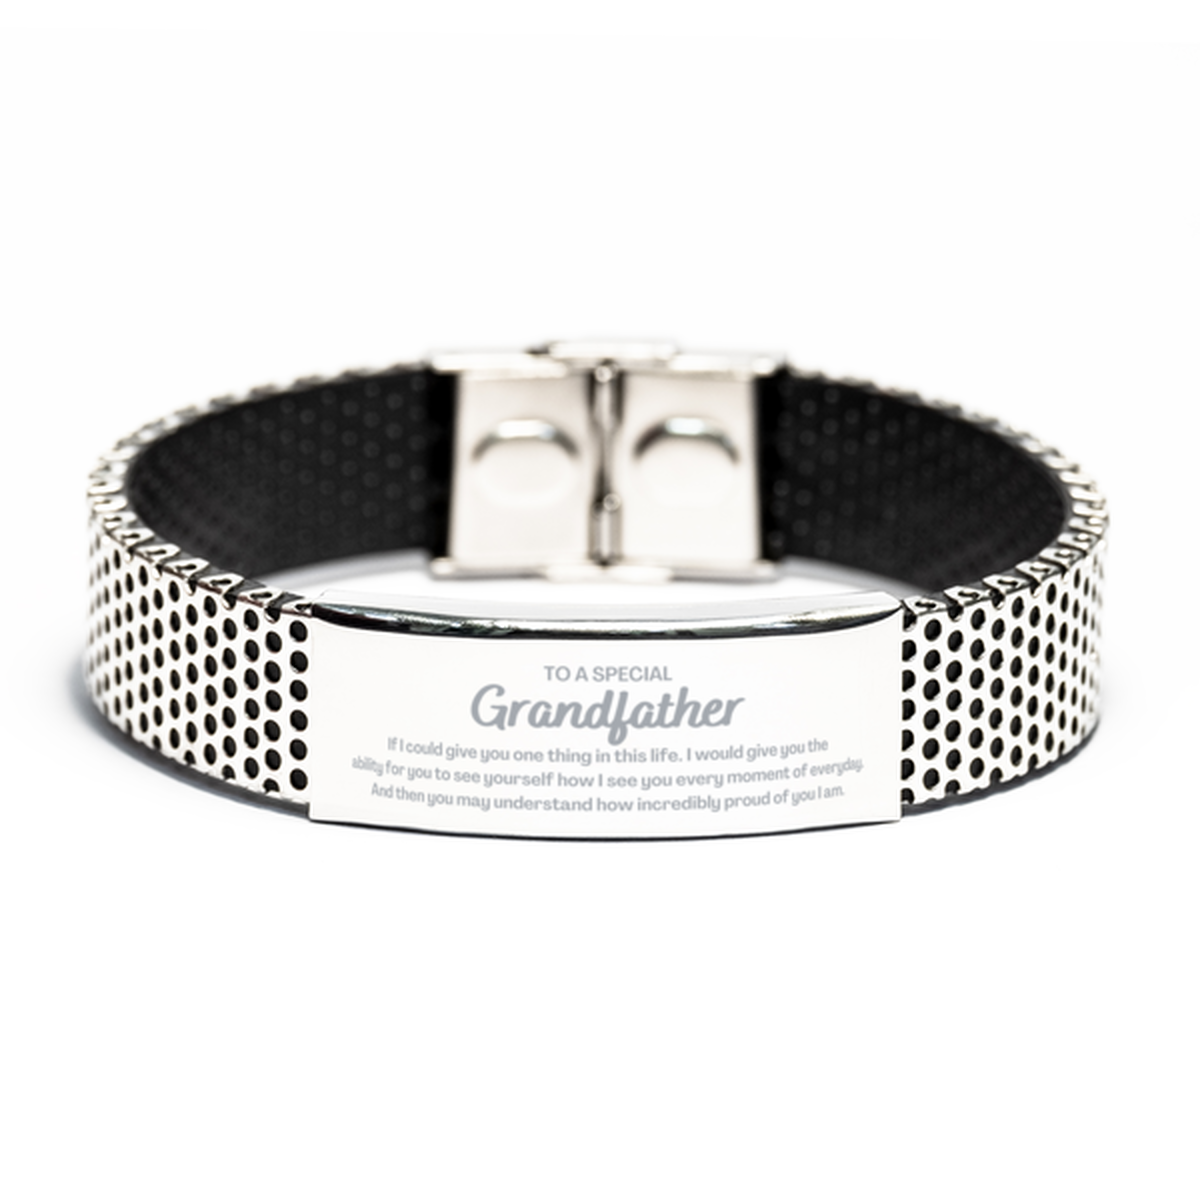 To My Grandfather Stainless Steel Bracelet, Gifts For Grandfather Engraved, Inspirational Gifts for Christmas Birthday, Epic Gifts for Grandfather To A Special Grandfather how incredibly proud of you I am